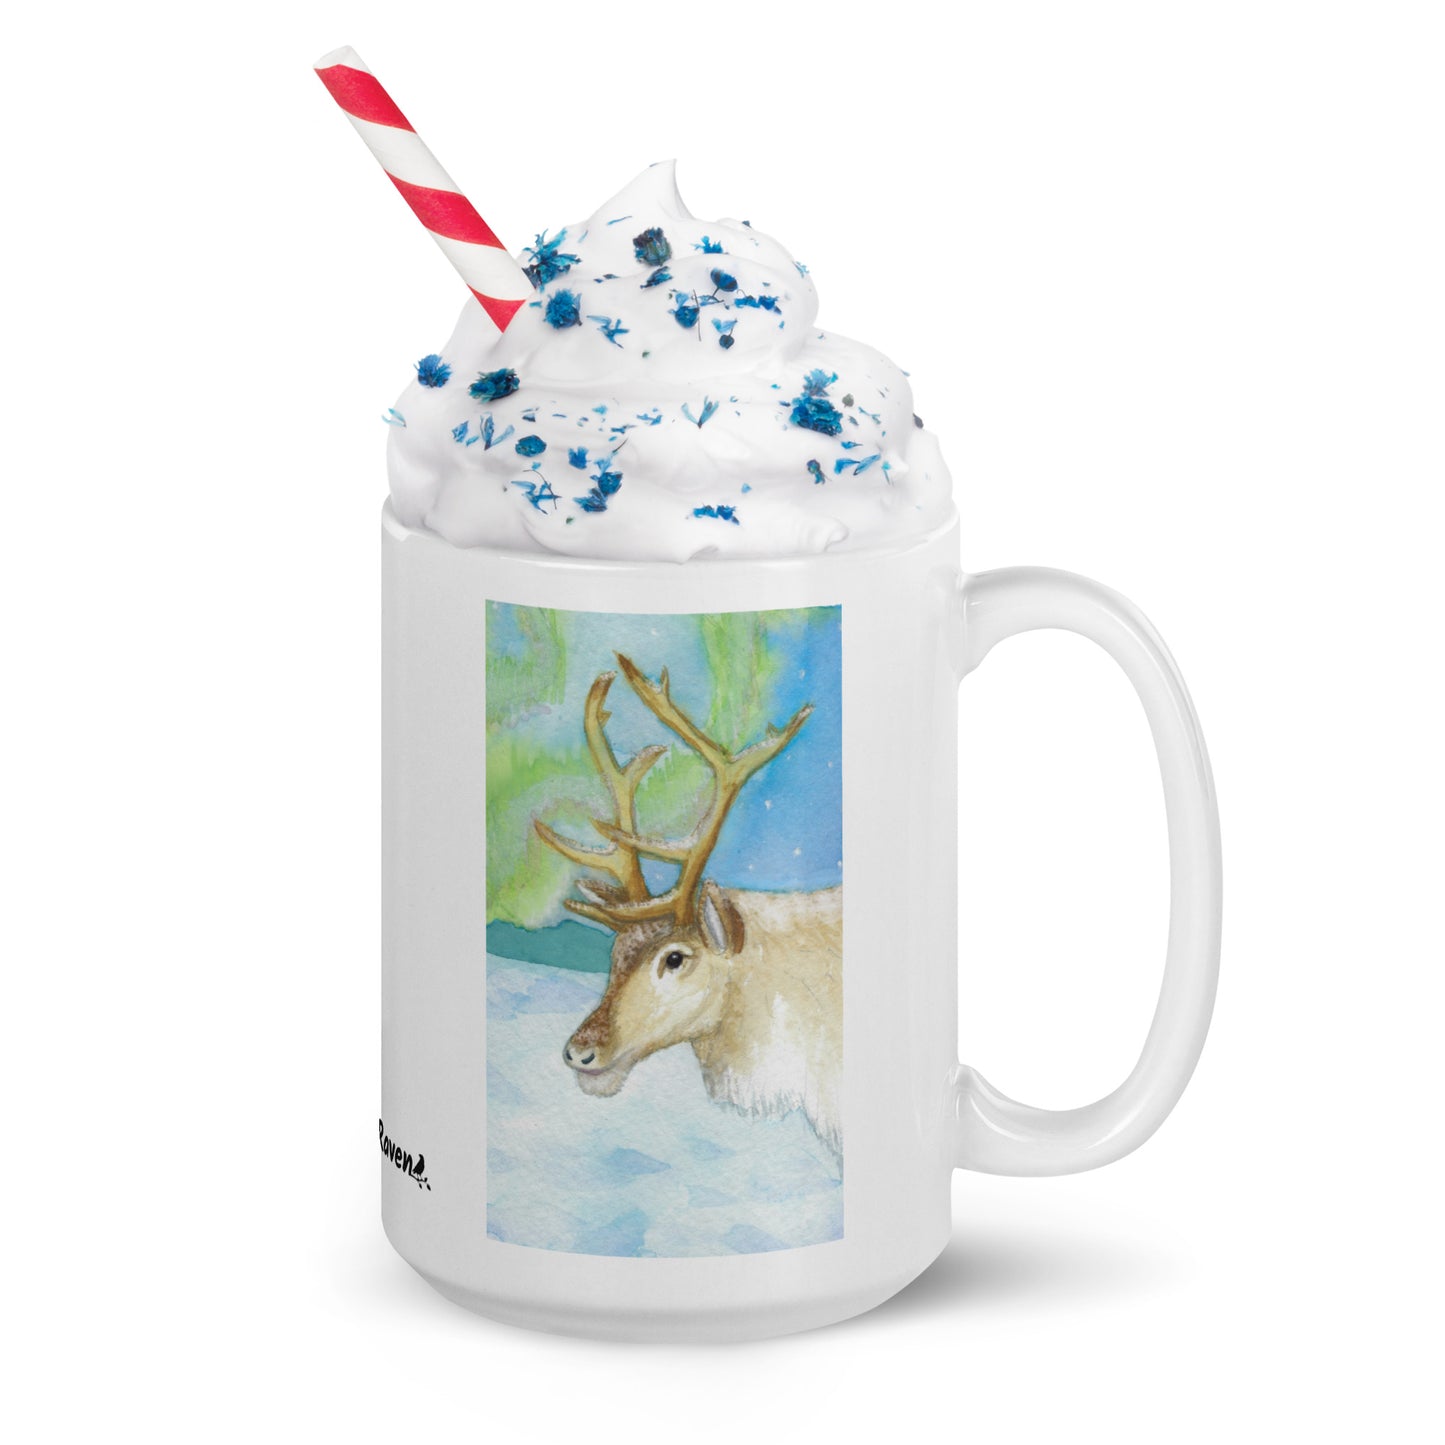 15 ounce ceramic mug featuring Northern Lights reindeer design. Double-sided print. Dishwasher and microwave safe. Shown with handle facing right, filled with whipped cream, sprinkles and a straw.